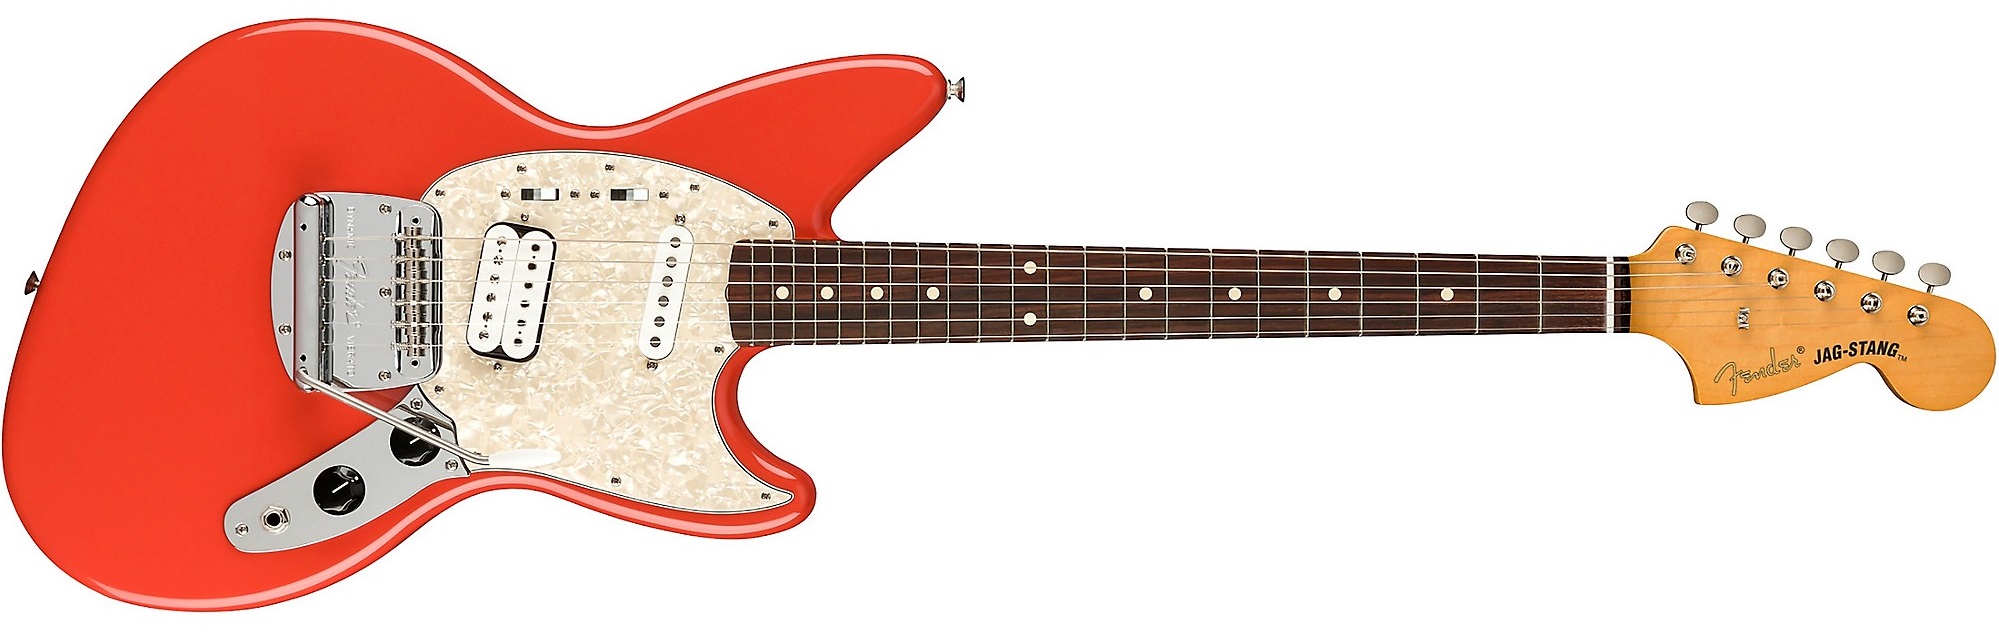 Fender Kurt Cobain Jag-Stang  Electric Guitar on a white background